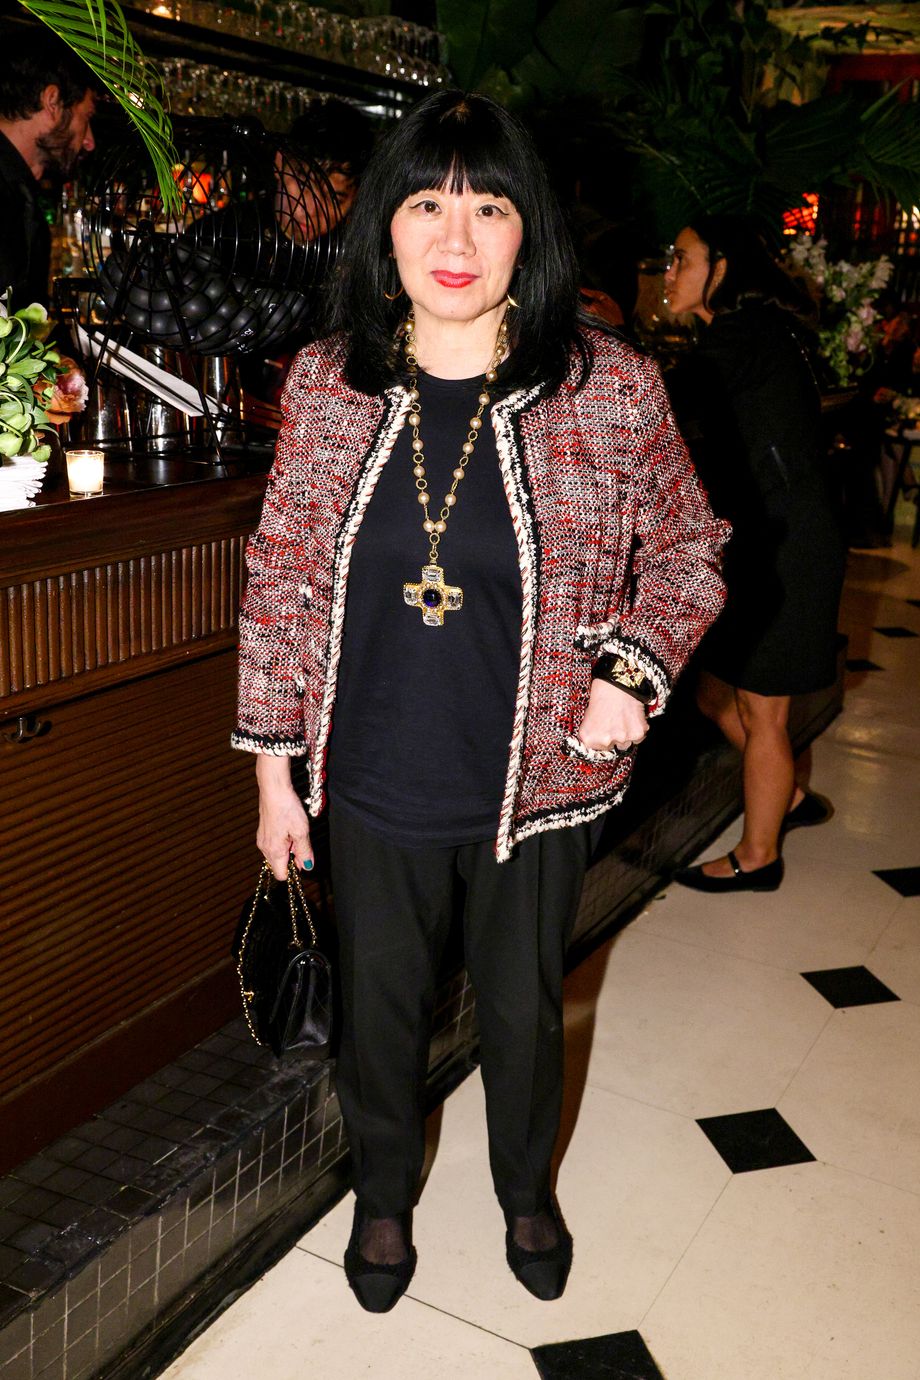 Chanel Hosts Dinner for Sofia Coppola's New Book, With a Game of